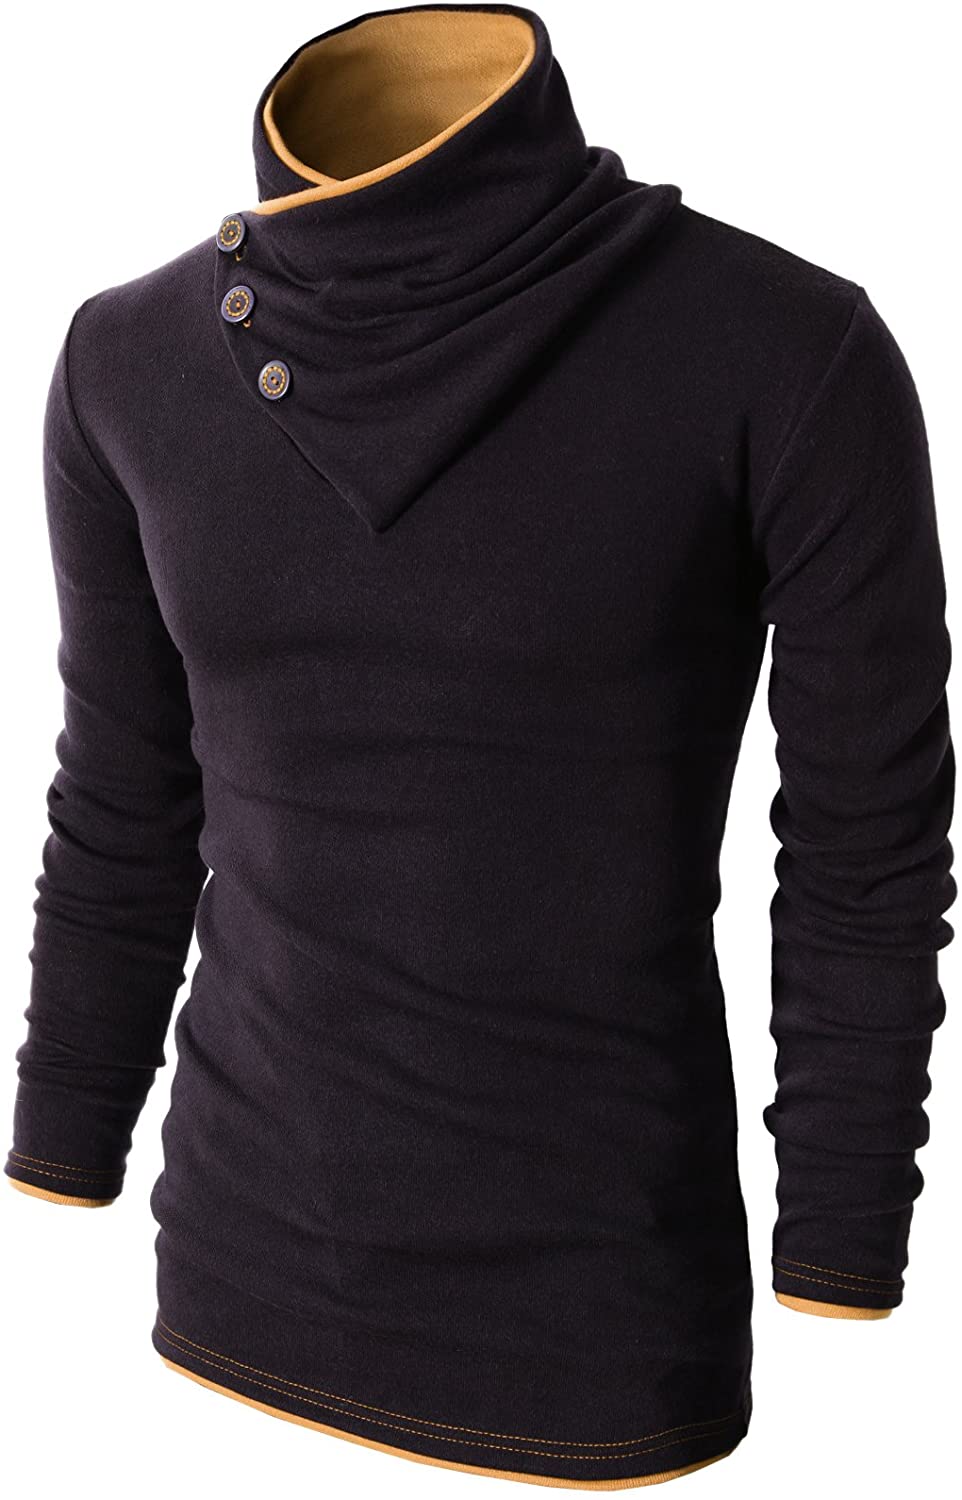 Ptyhk RG Mens Casual Slim Comfortably Knitted Long Sleeve V-Neck Sweaters Tops 